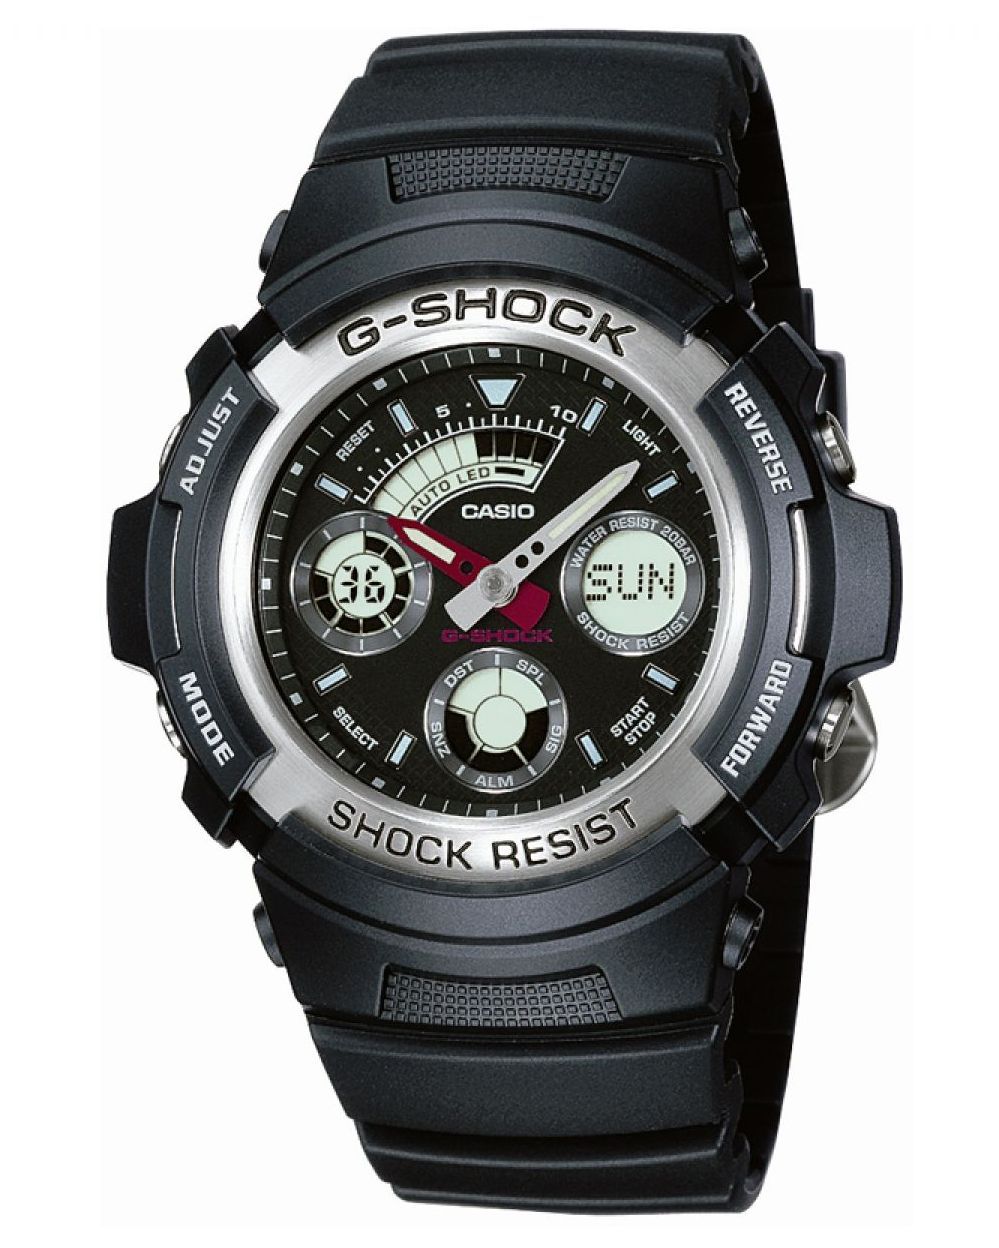 This Casio G-shock Analogue-Digital Watch for Men is the perfect timepiece to wear or to gift. It's Black 46 mm Round case combined with the comfortable Black Plastic will ensure you enjoy this stunning timepiece without any compromise. Operated by a high quality Quartz movement and water resistant to 20 bars, your watch will keep ticking. This is a perfect sporty and business causal watch for you, it's a great gift for family or friends -The watch has a calendar function: Day-Date-Month, World Time, Stopwatch, Countdown, Alarm, Light High quality 21 cm length and 21 mm width Black Plastic strap with a Buckle Case diameter: 46 mm,case thickness: 15 mm, case colour: Black and dial colour: Black